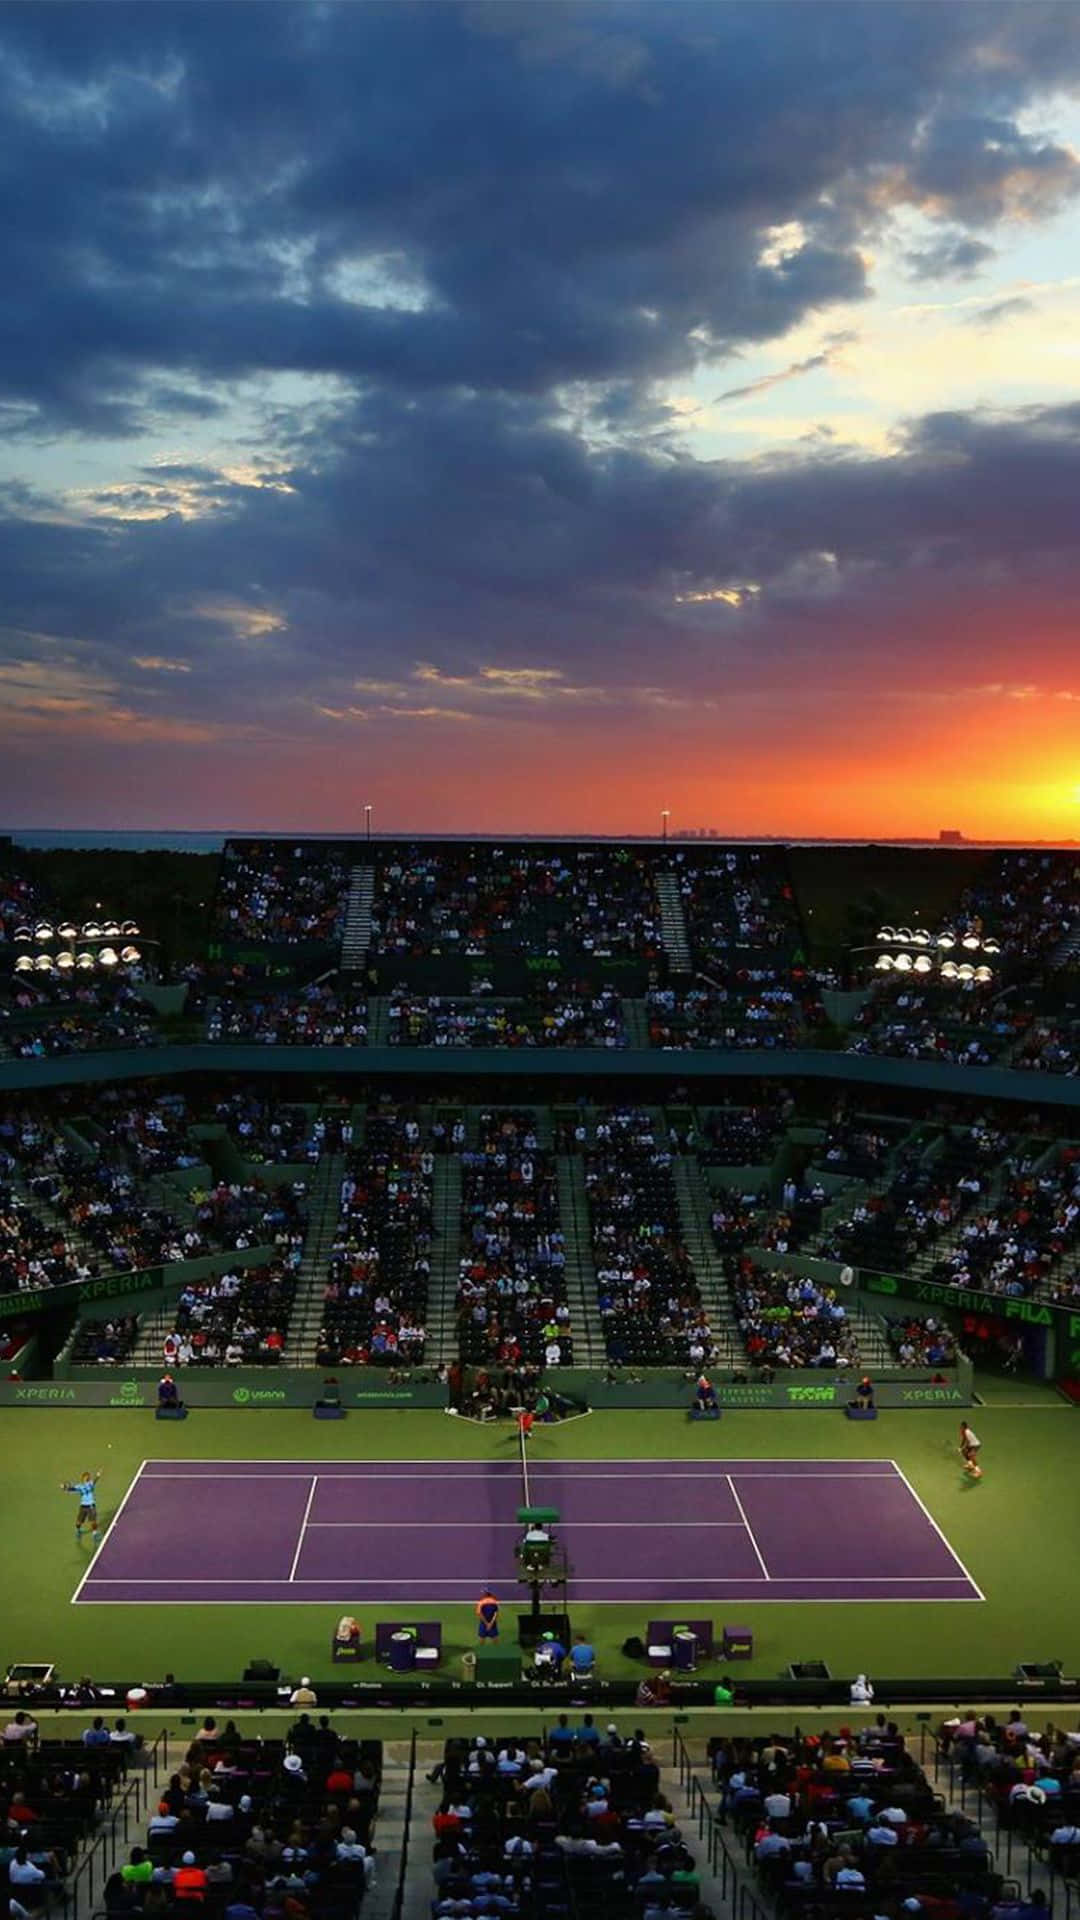 A Tennis Court With A Sunset Behind It